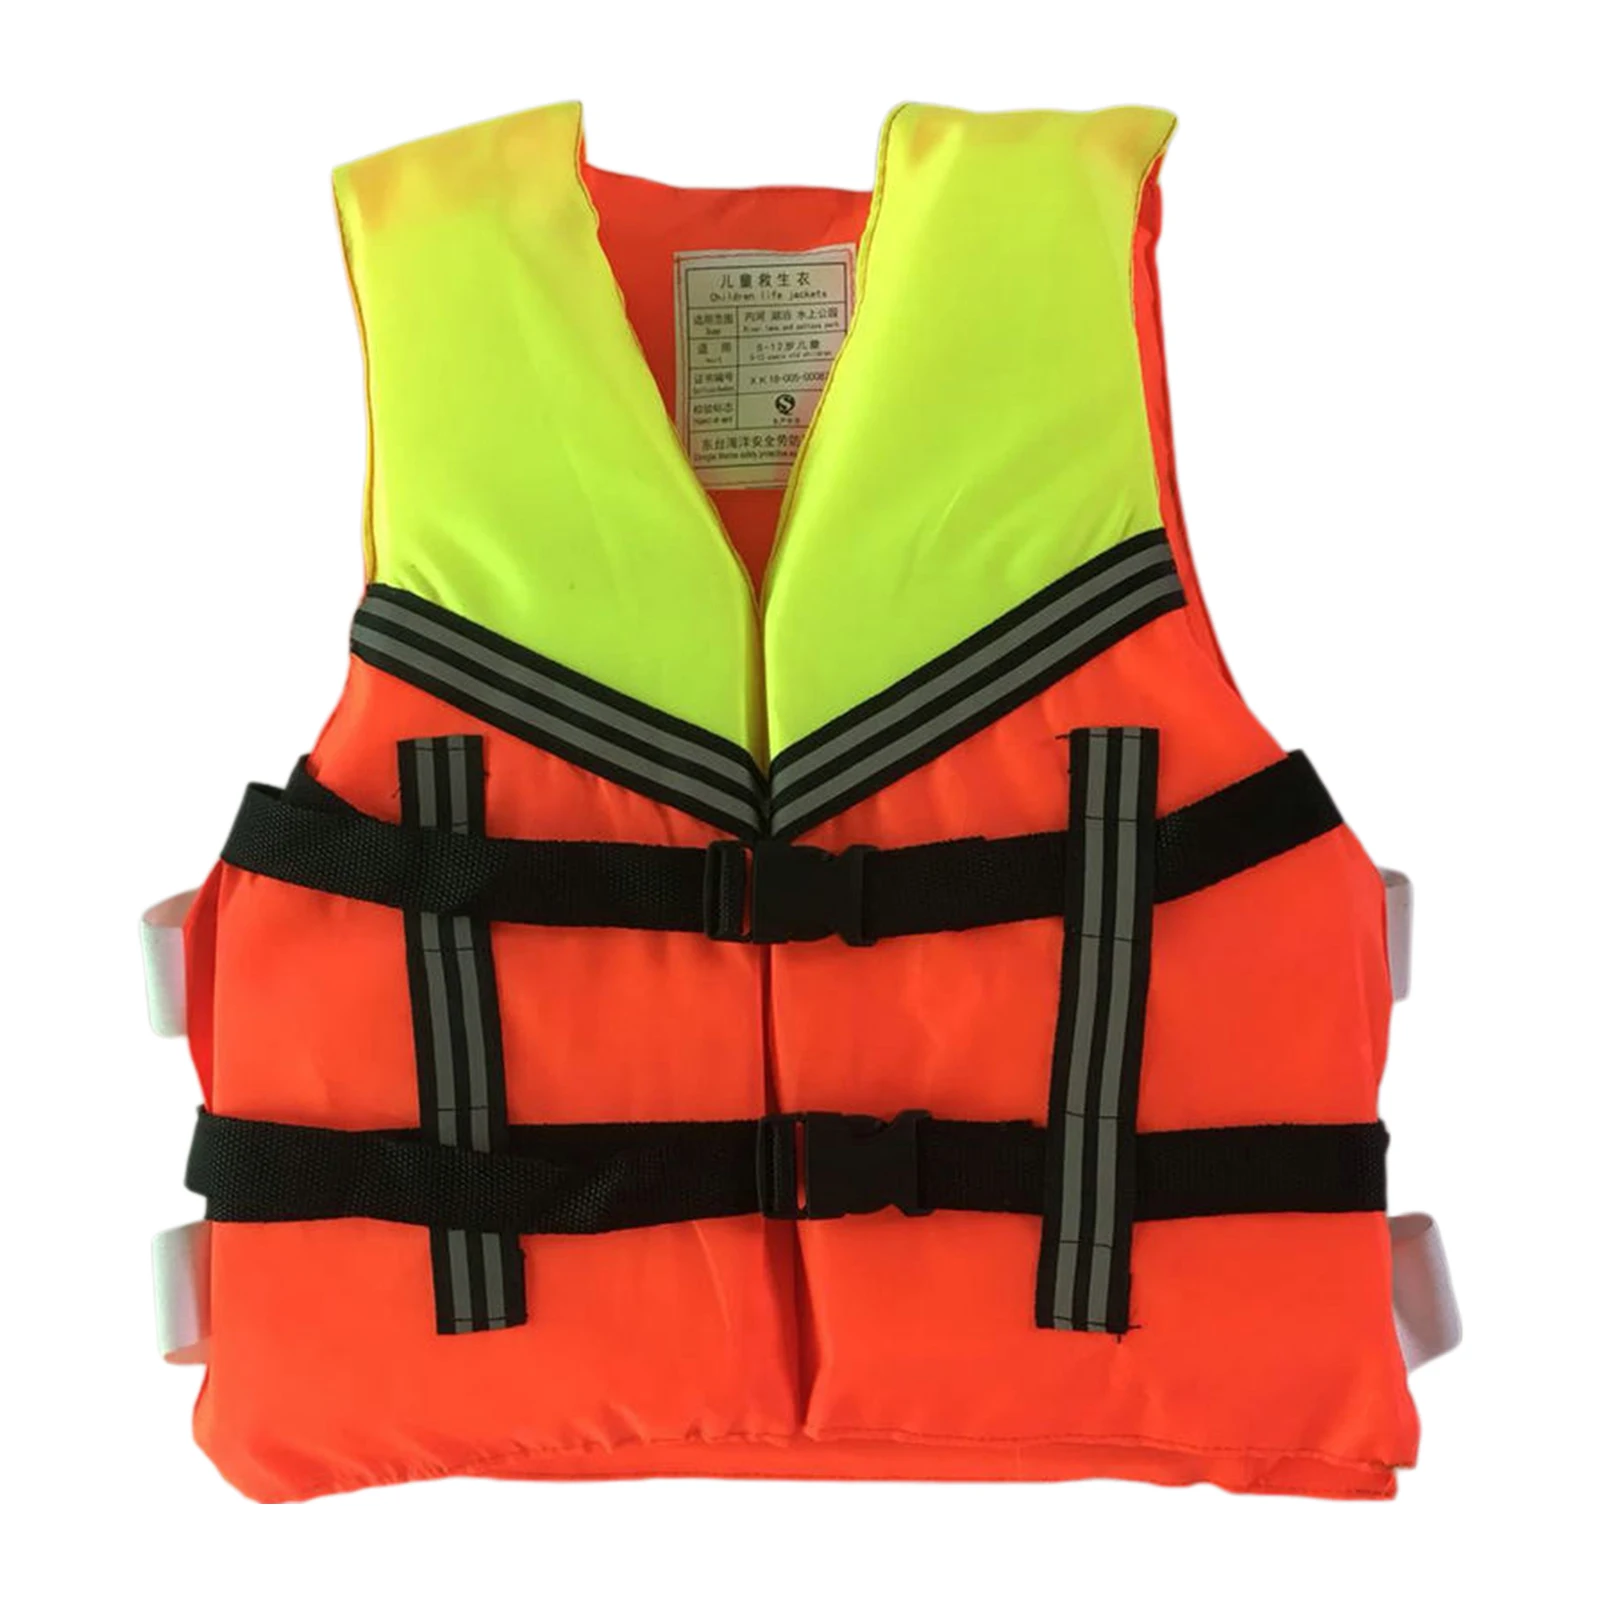 Float Jacket Kids Swim Vest Life Jacket Swimming Aid for Toddlers Children Swimsuit Learn to Swim